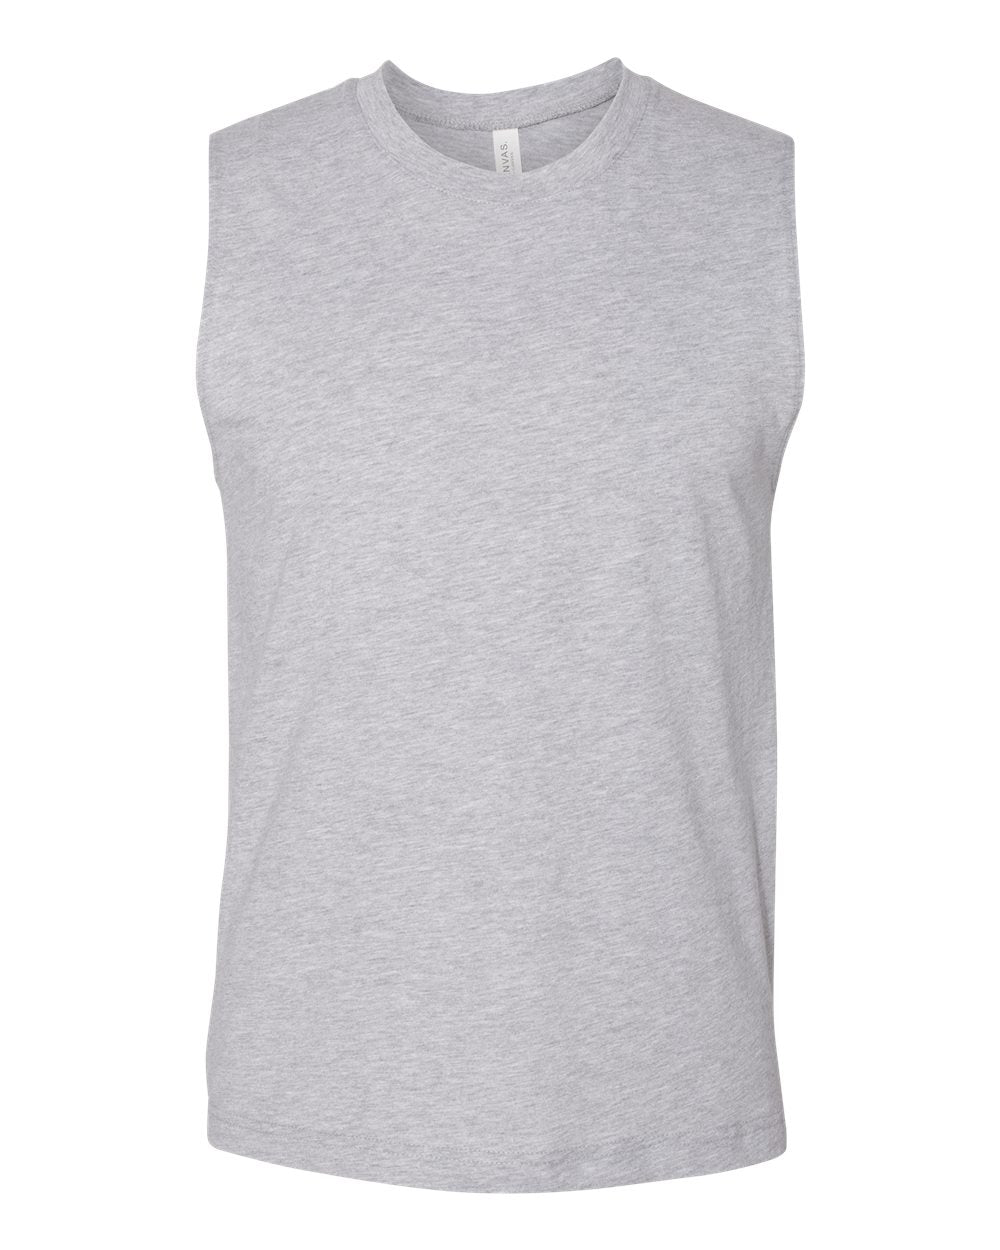 bella+canvas muscle tank athletic heather